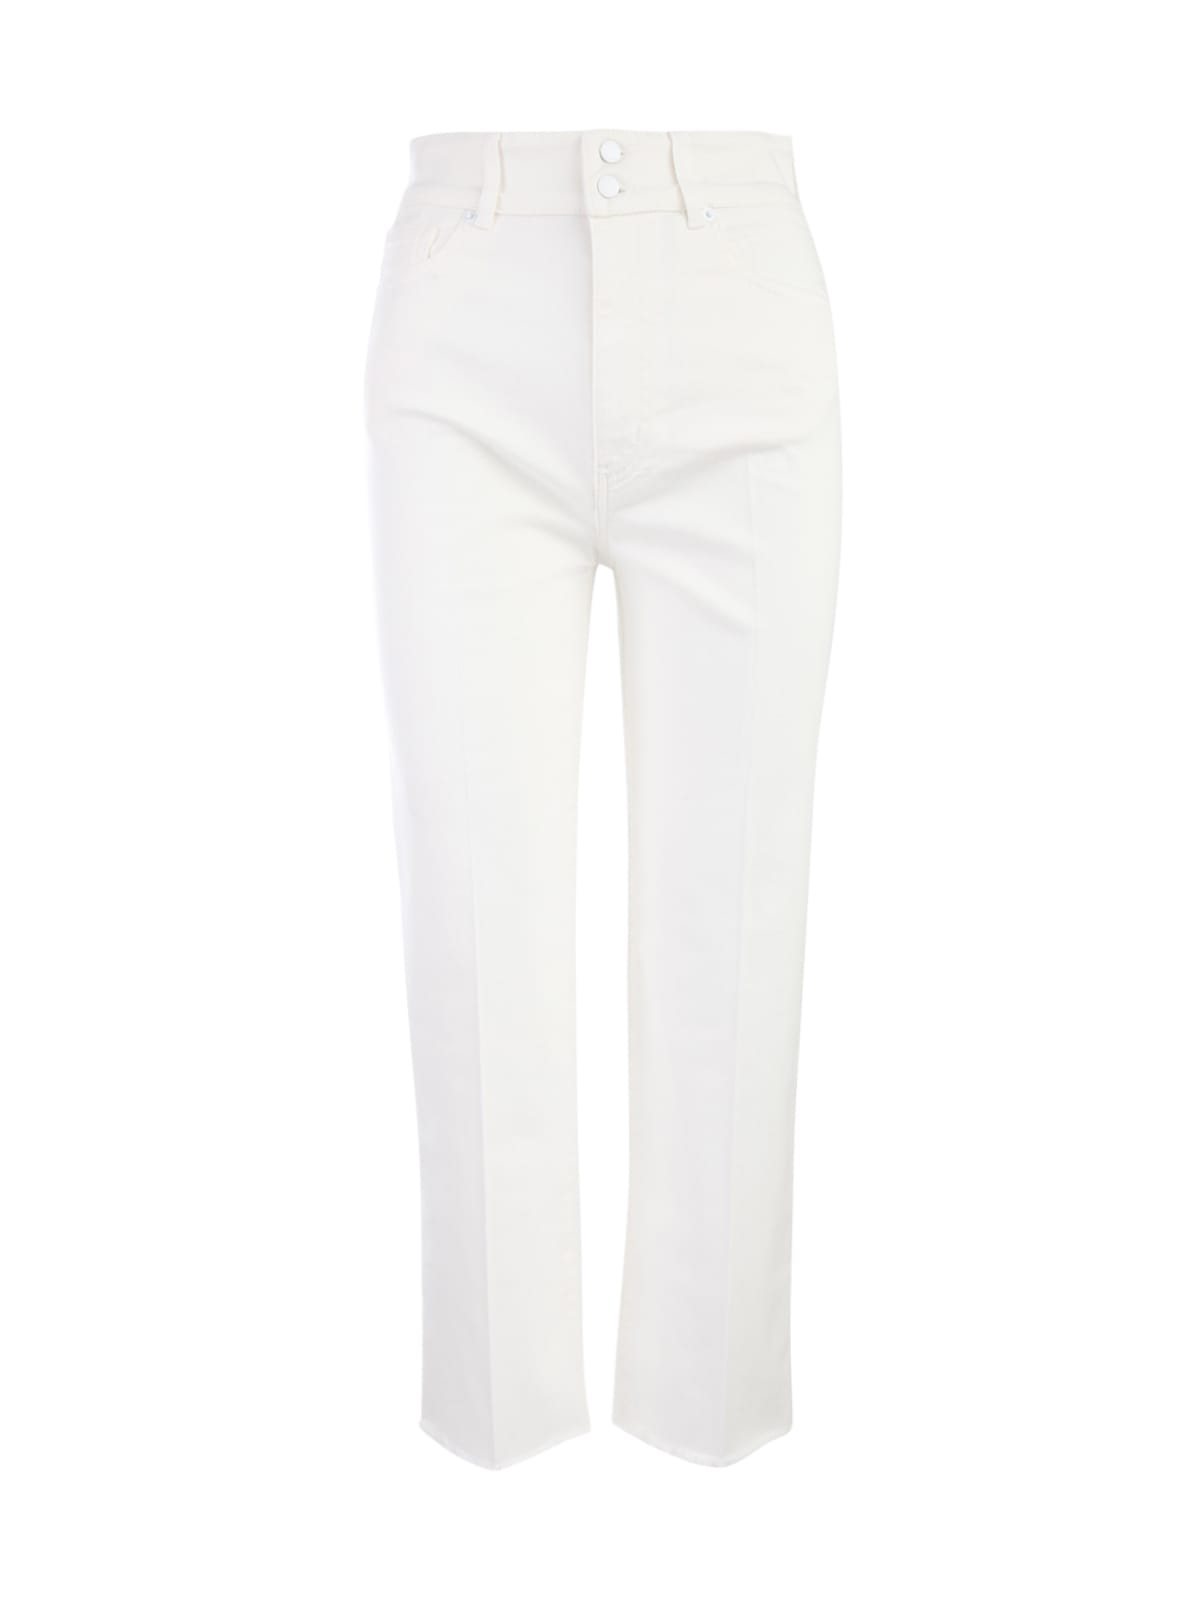 Love Moschino Raw Cut 5 Pockets Trousers